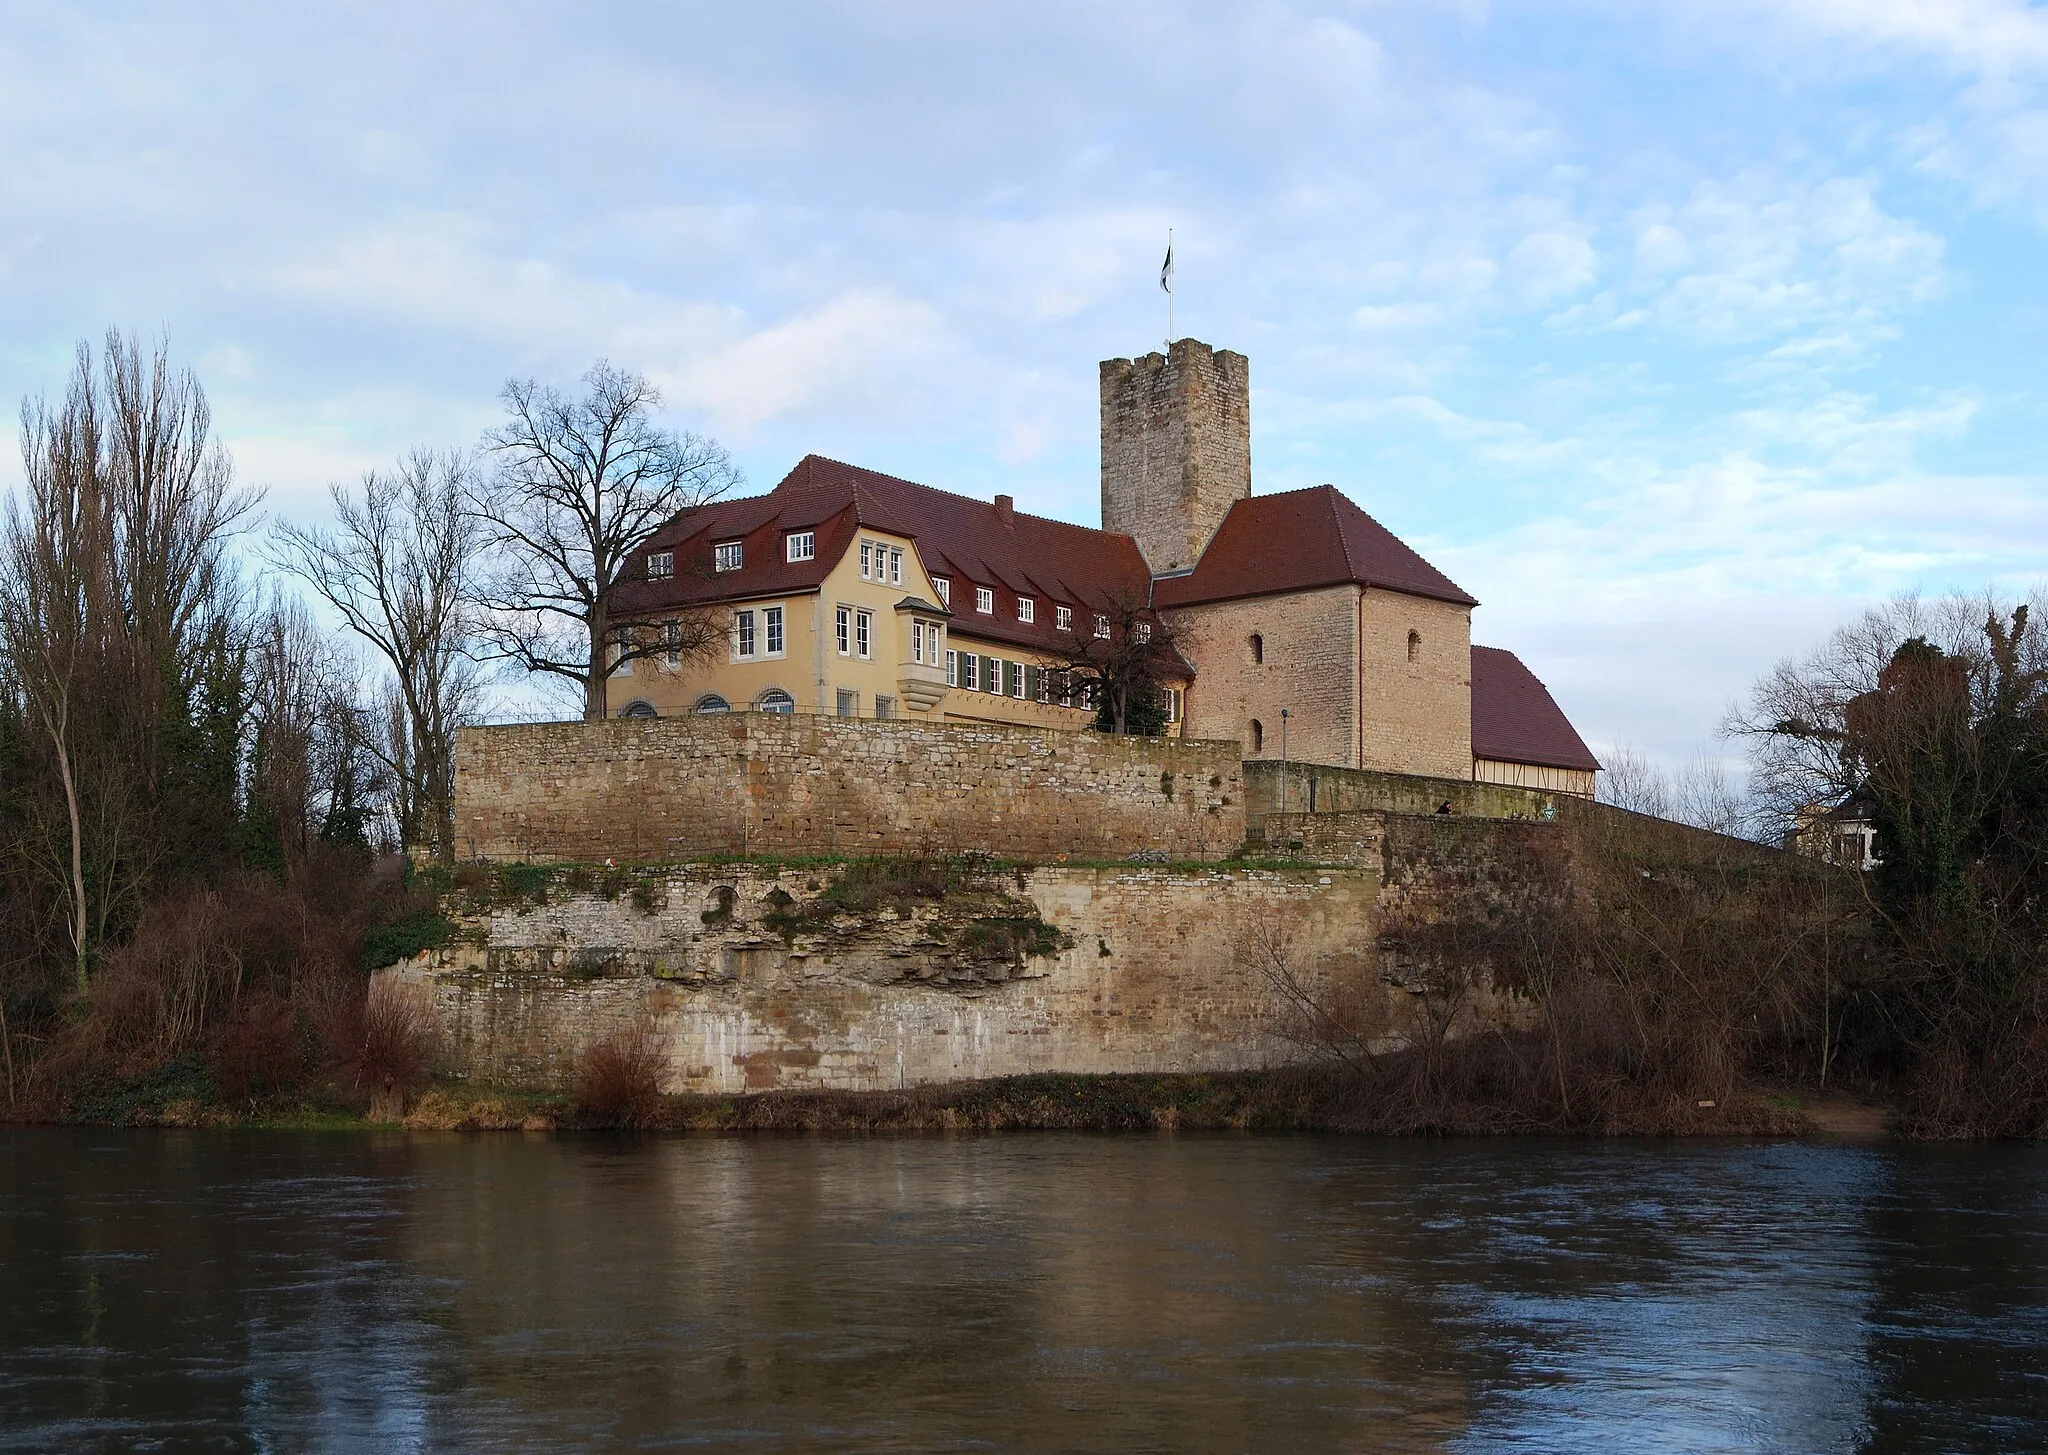 Photo showing: The Grafenburg (now used as town hall) in Lauffen am Neckar, Baden-Württemberg.